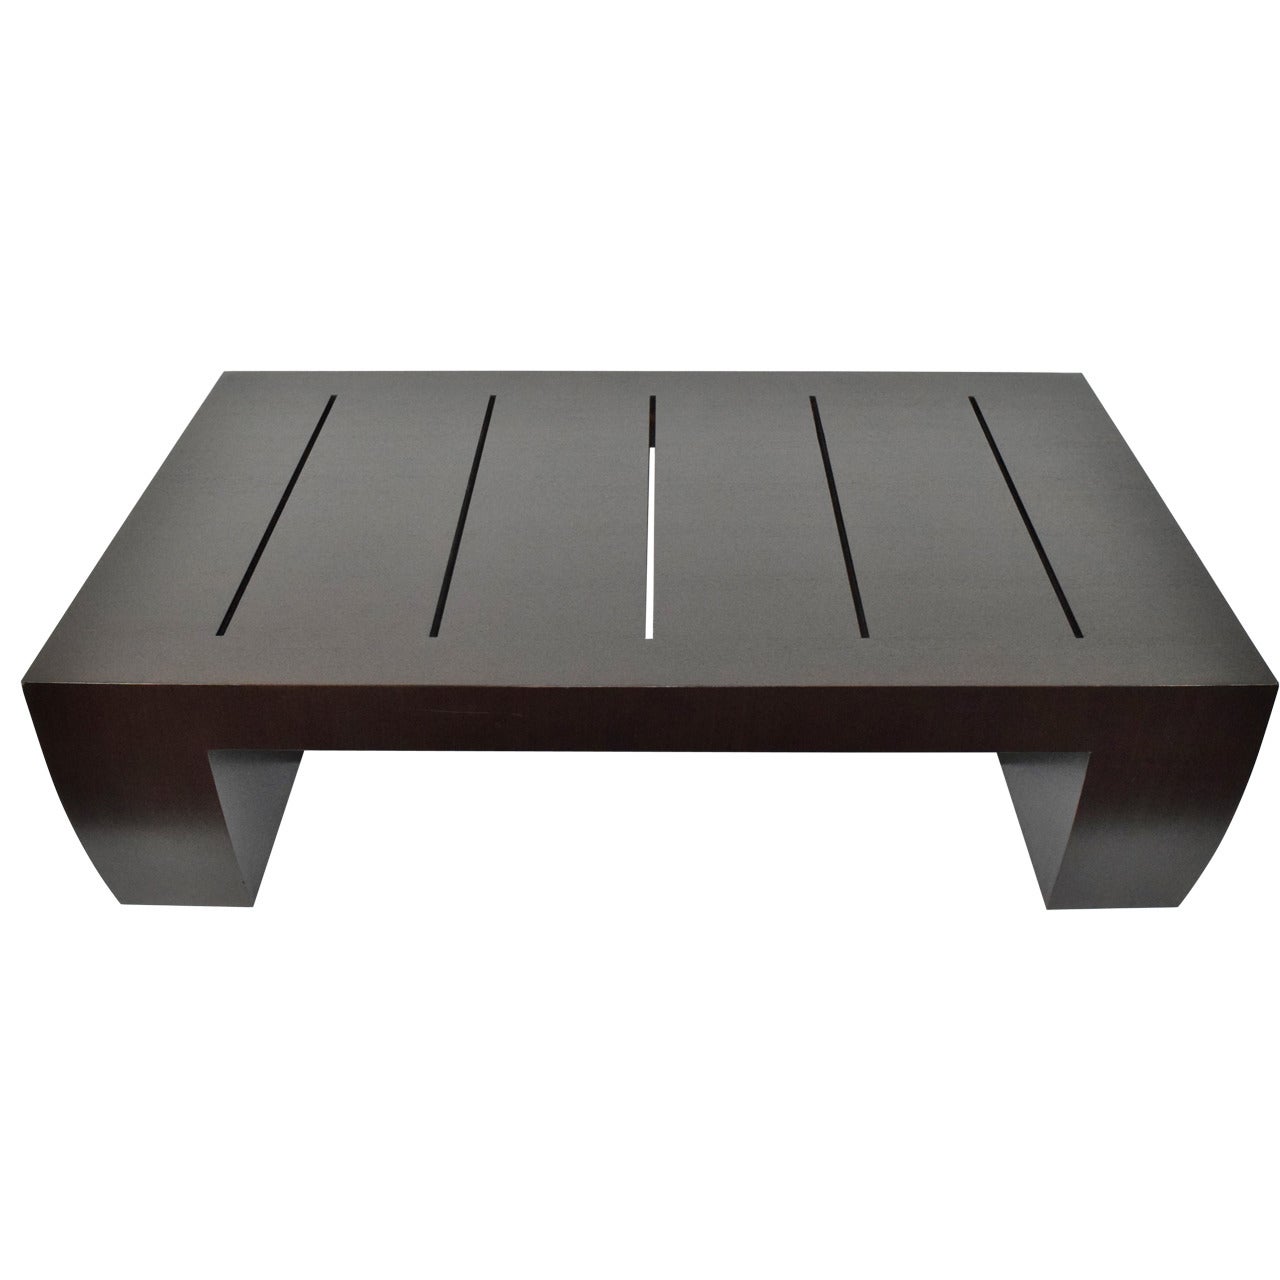 "Clifton Road" Mahogany Coffee Table by Terry Hunziker in Espresso Finish